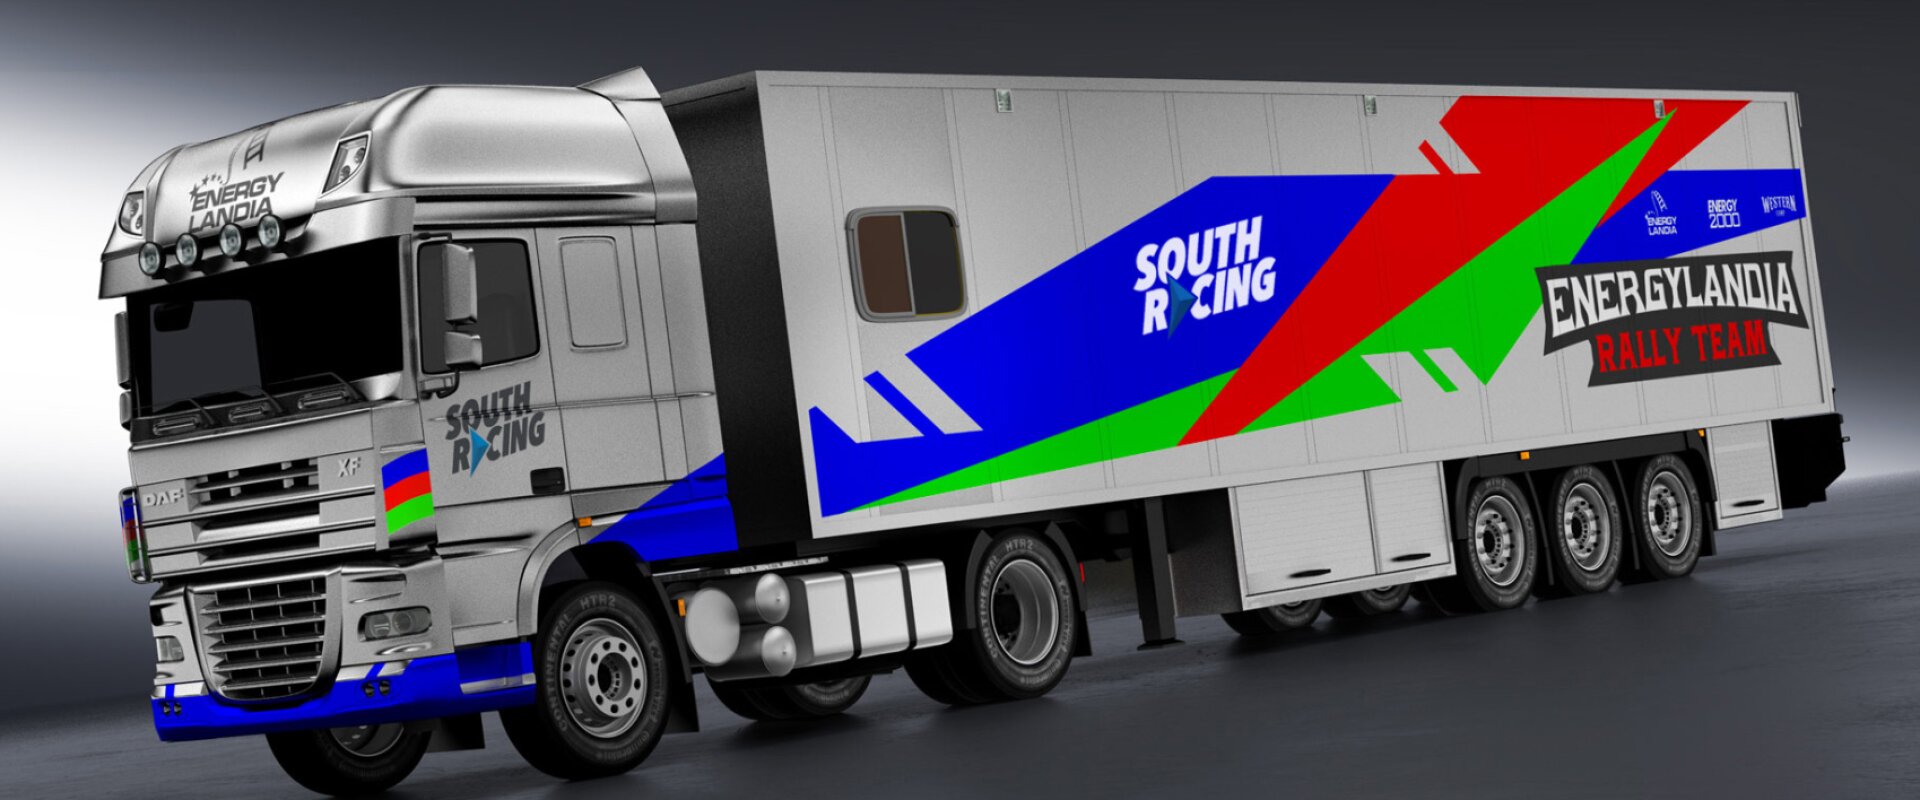 trailer and truck livery design